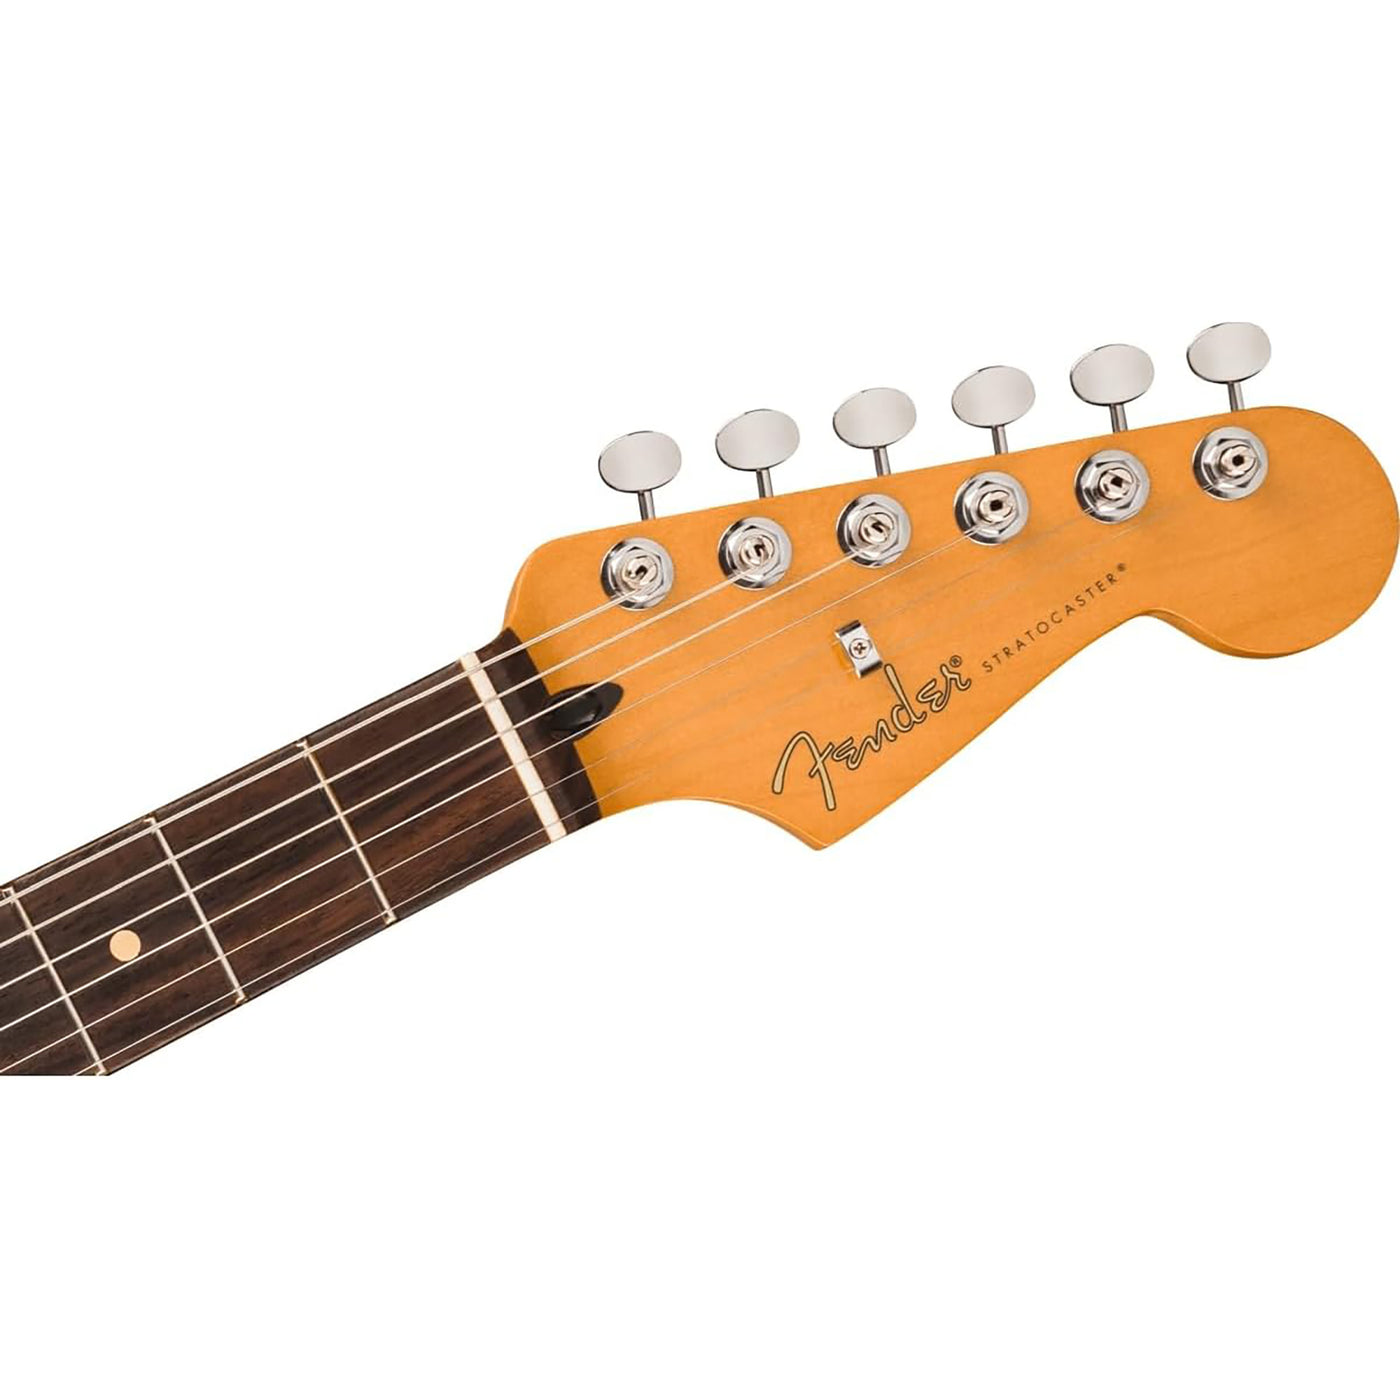 Fender 70th-Anniversary Player Stratocaster Guitar with Rosewood Fingerboard - Nebula Noir (0147040397)